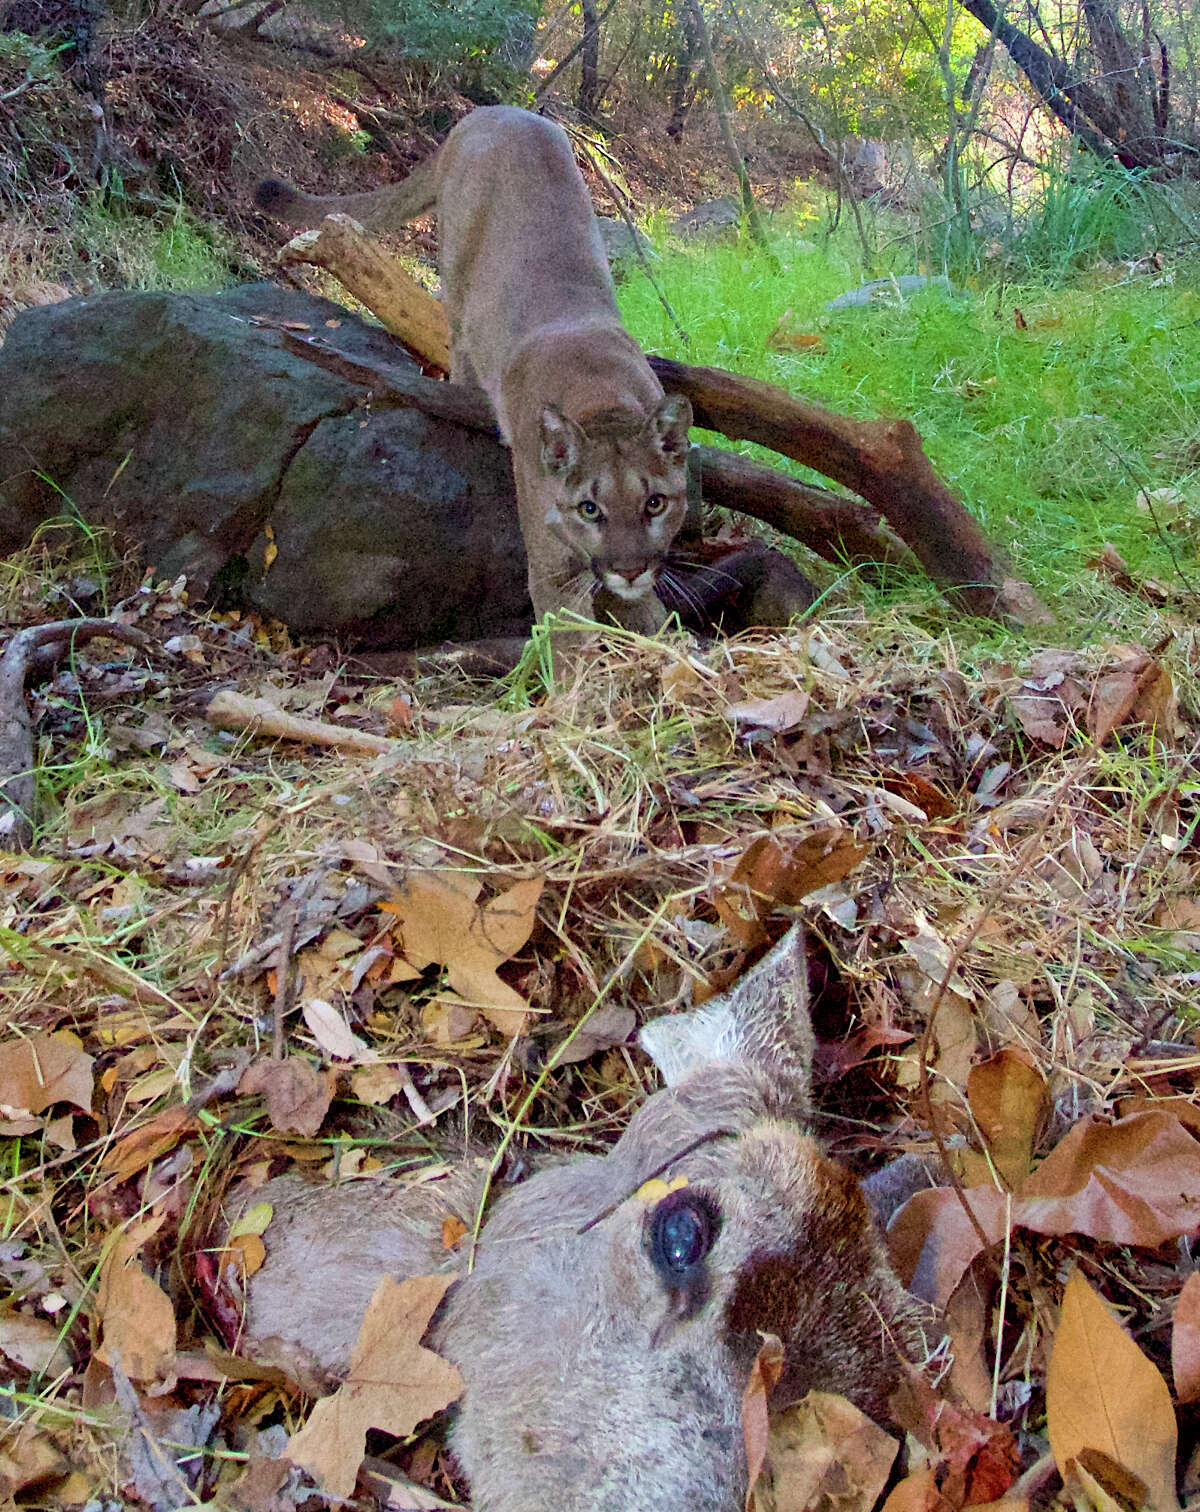 This Feb. 3, 2014 remote camera photo provided by the National Park Service shows mountain lion P-23 approaching a kill in the Santa Monica Mountains. Officials in Hays County advised park visitors carry pepper spray after several deer were killed.